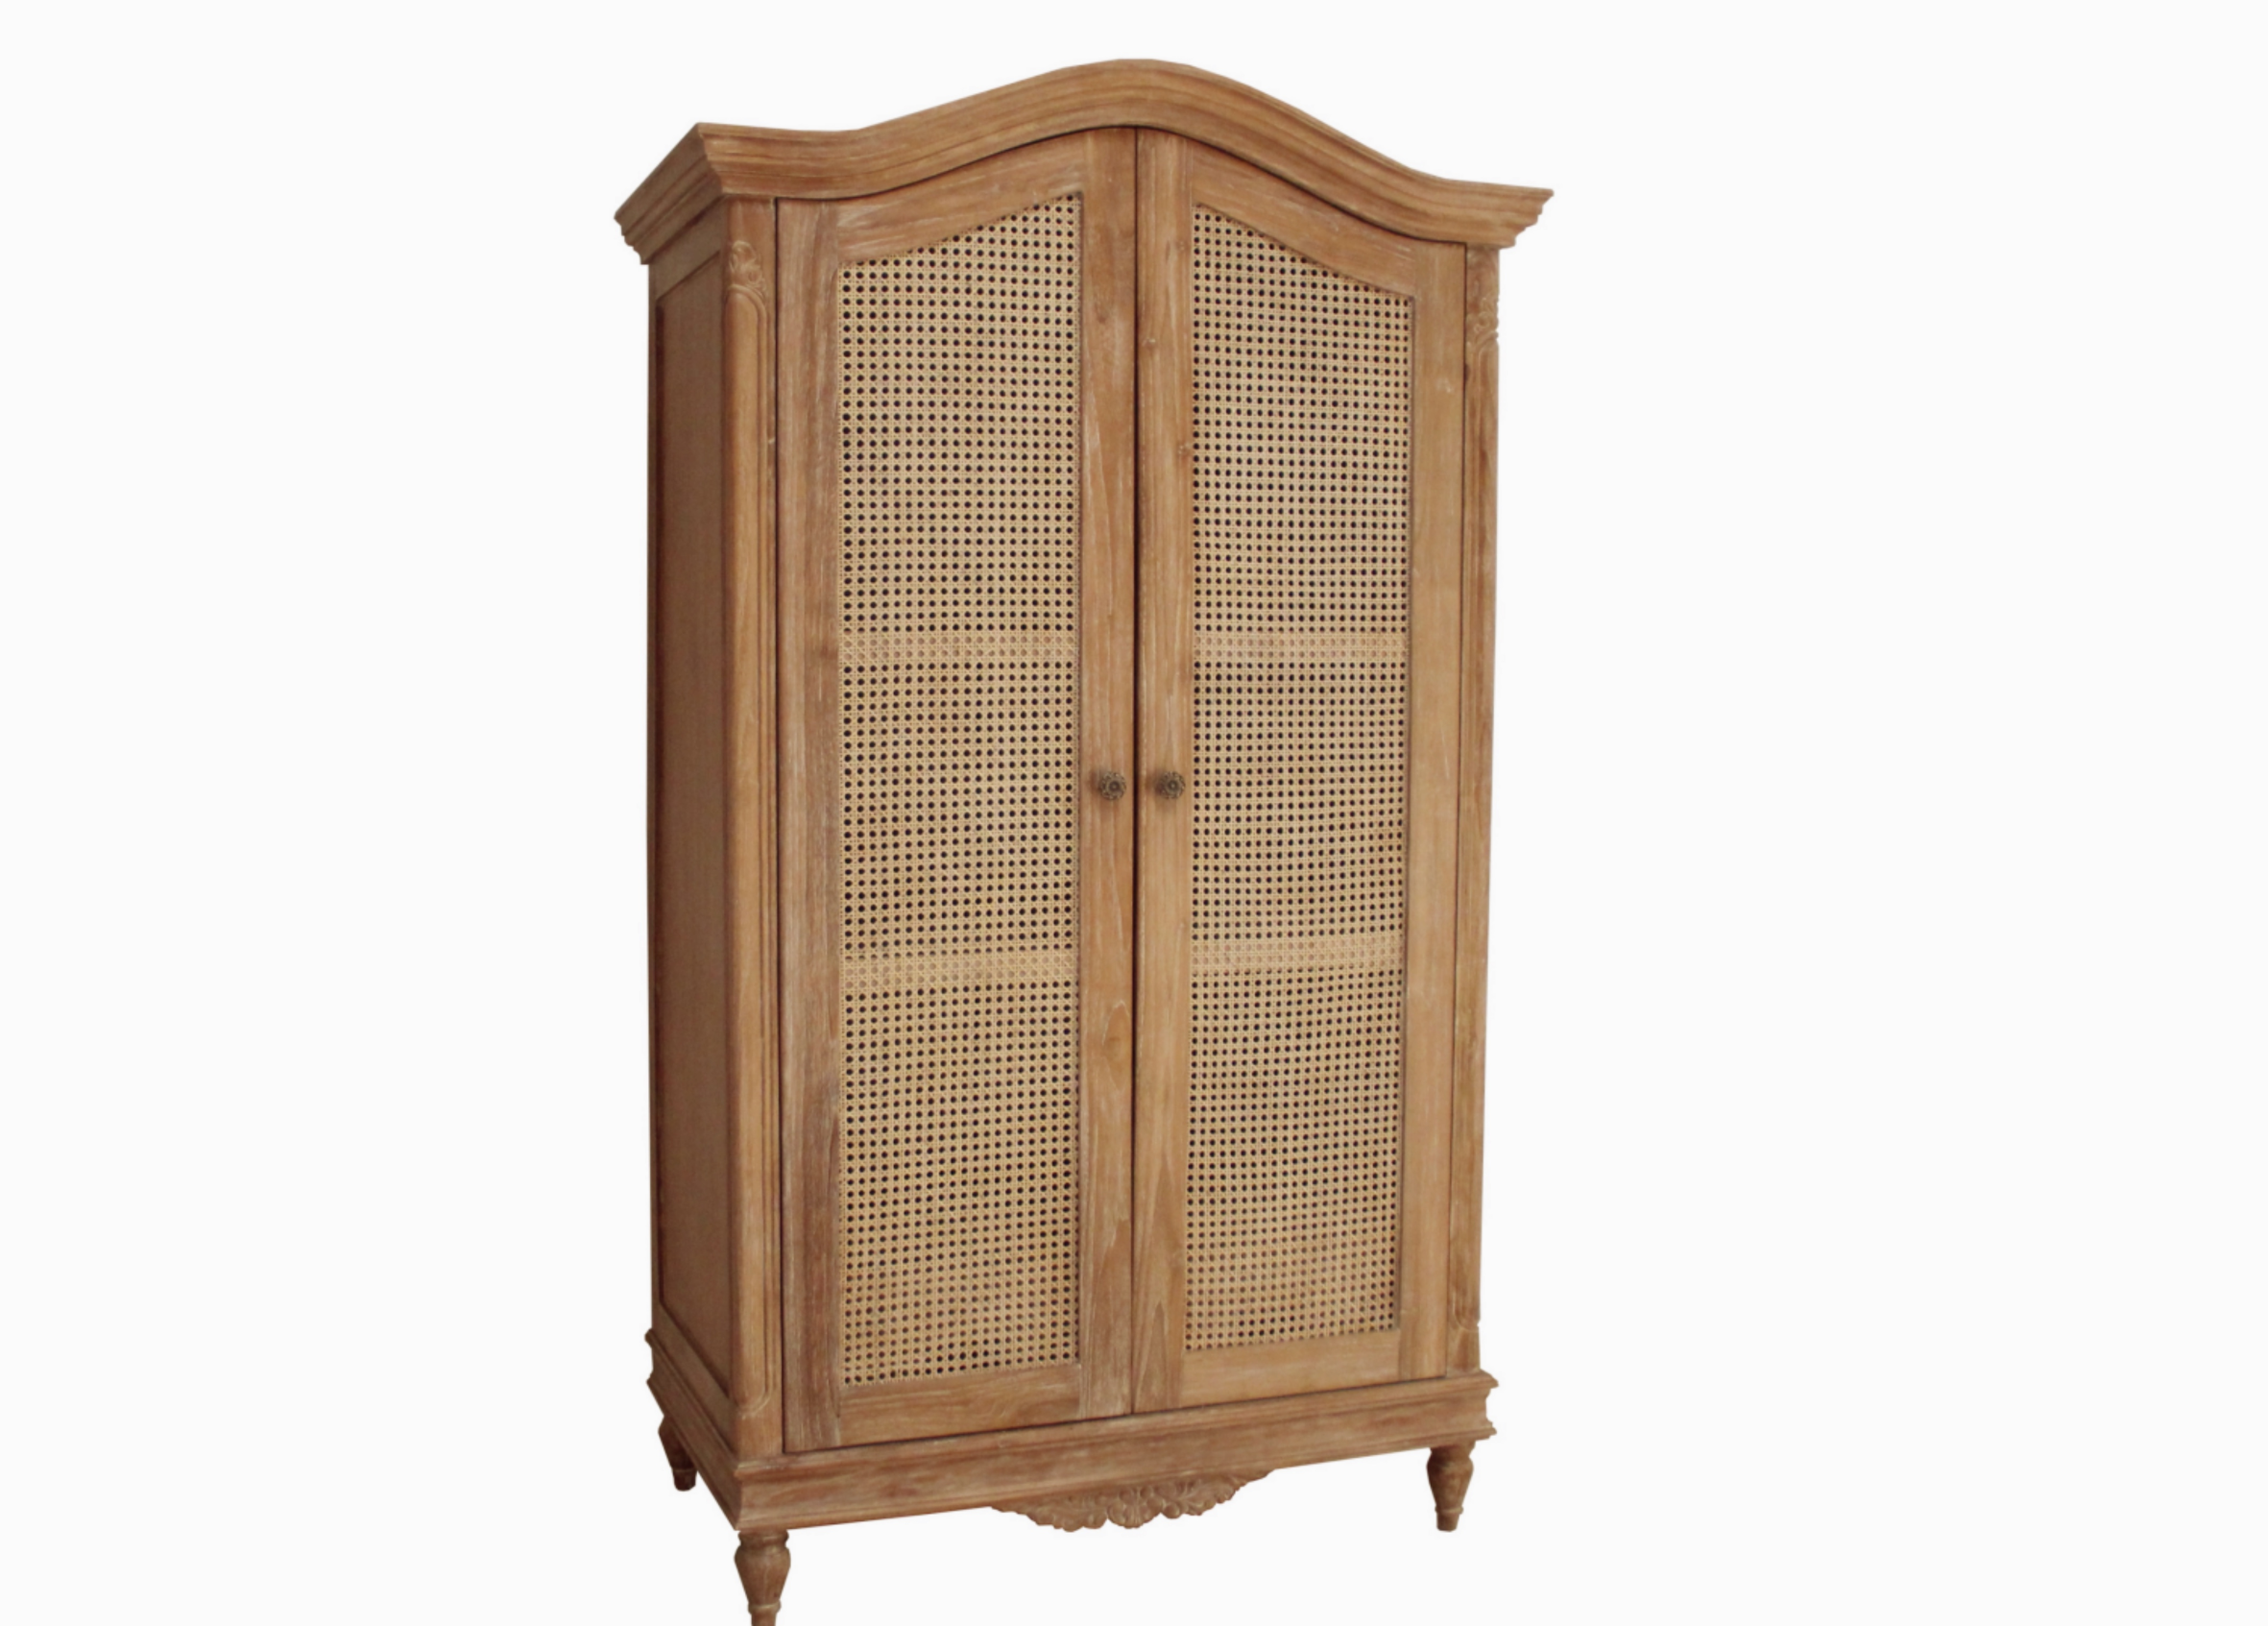 Belle French Weathered Wardrobe With Rattan Doors